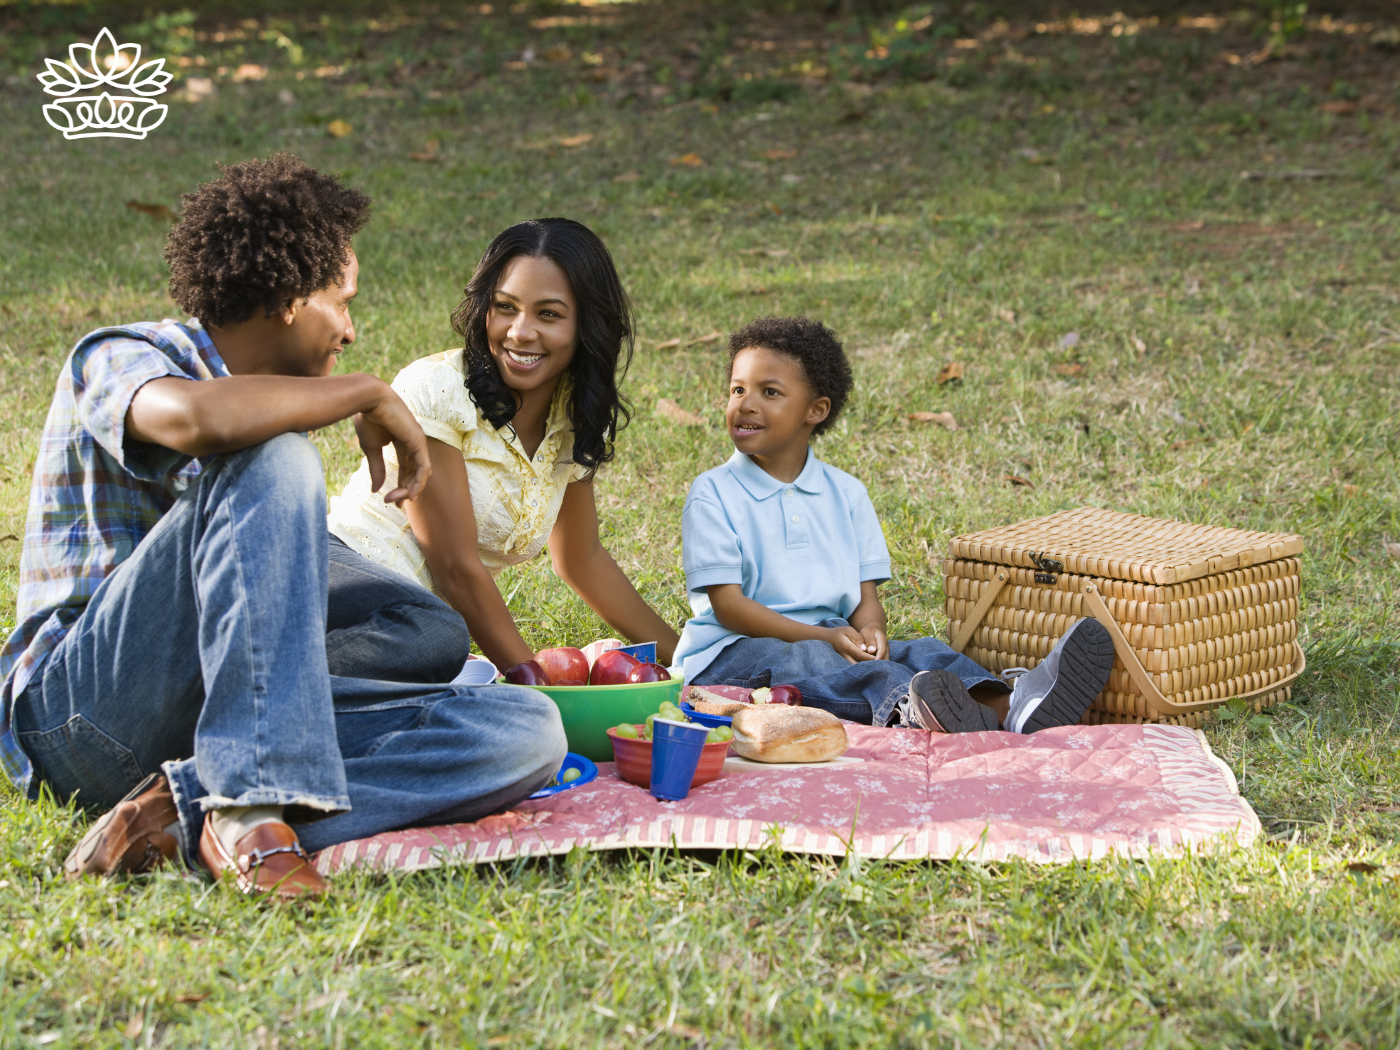 A happy family enjoying a picnic in the park - Fabulous Flowers and Gifts, All Fabulous Flowers and Gift Boxes.